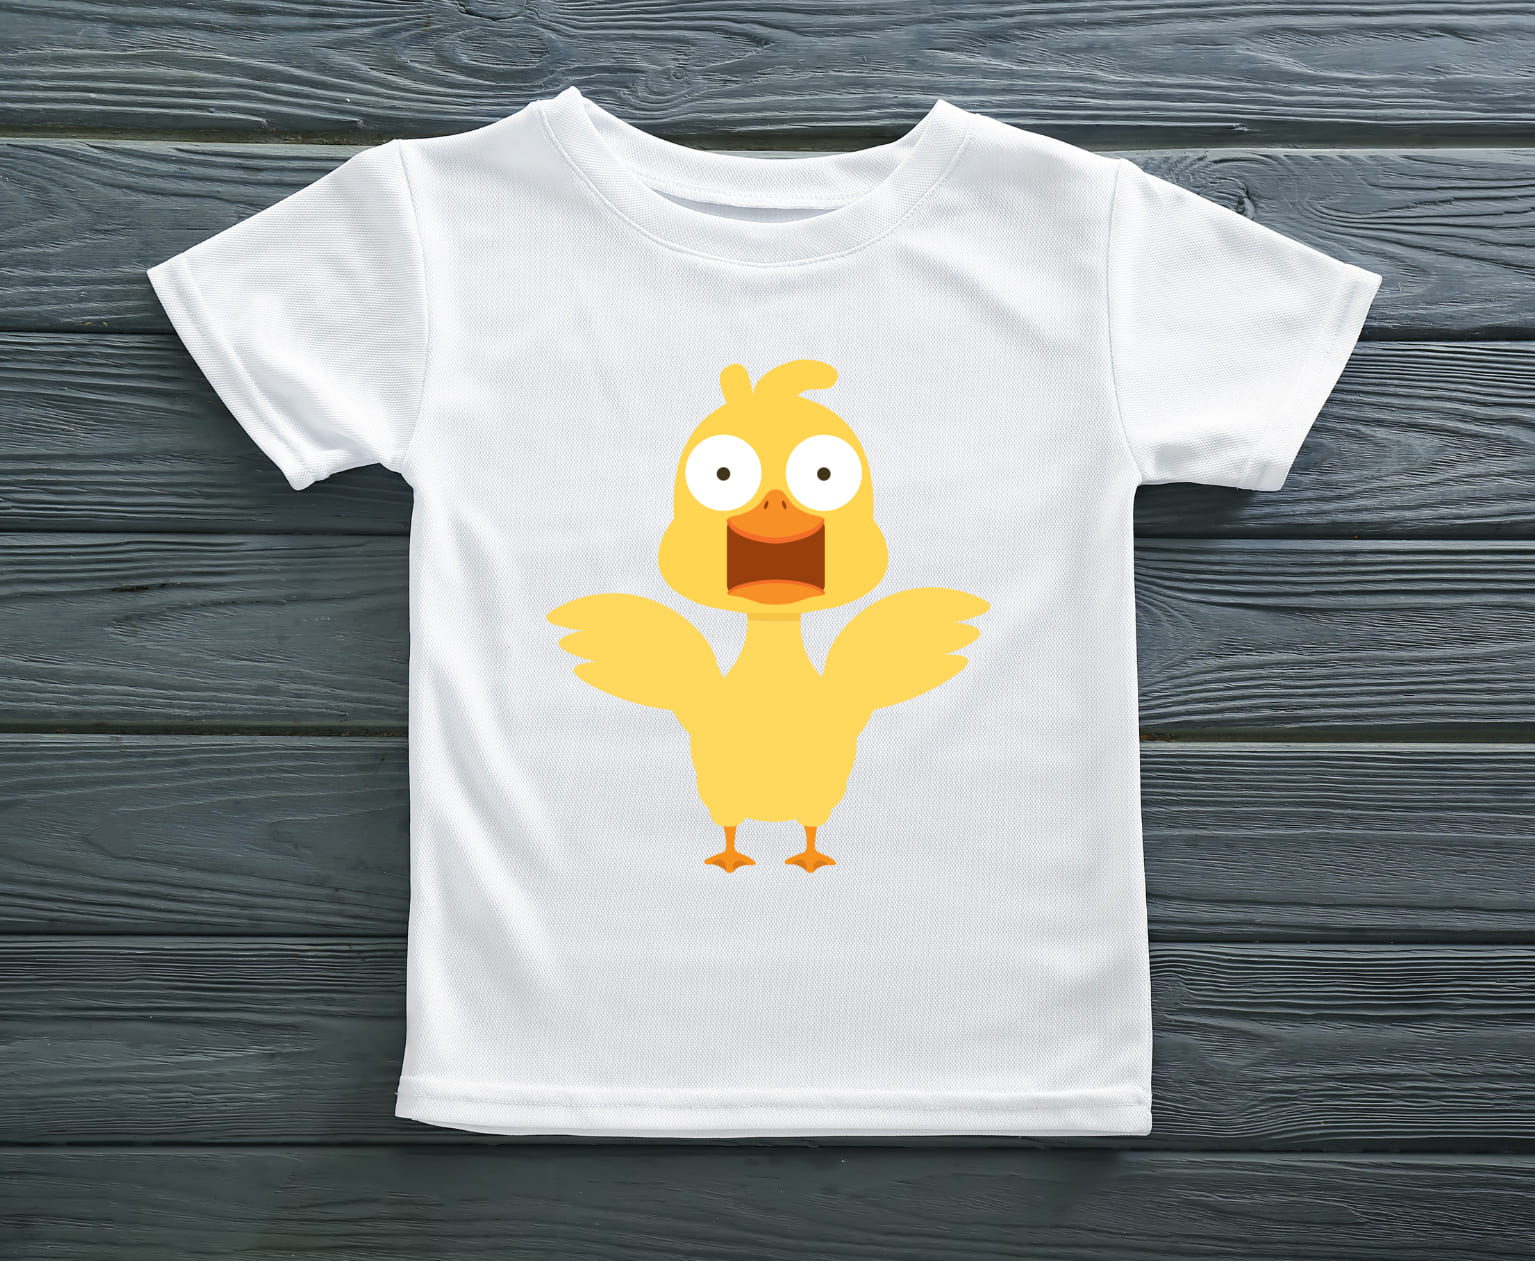 Image of white t-shirt with great print of a cute duck.